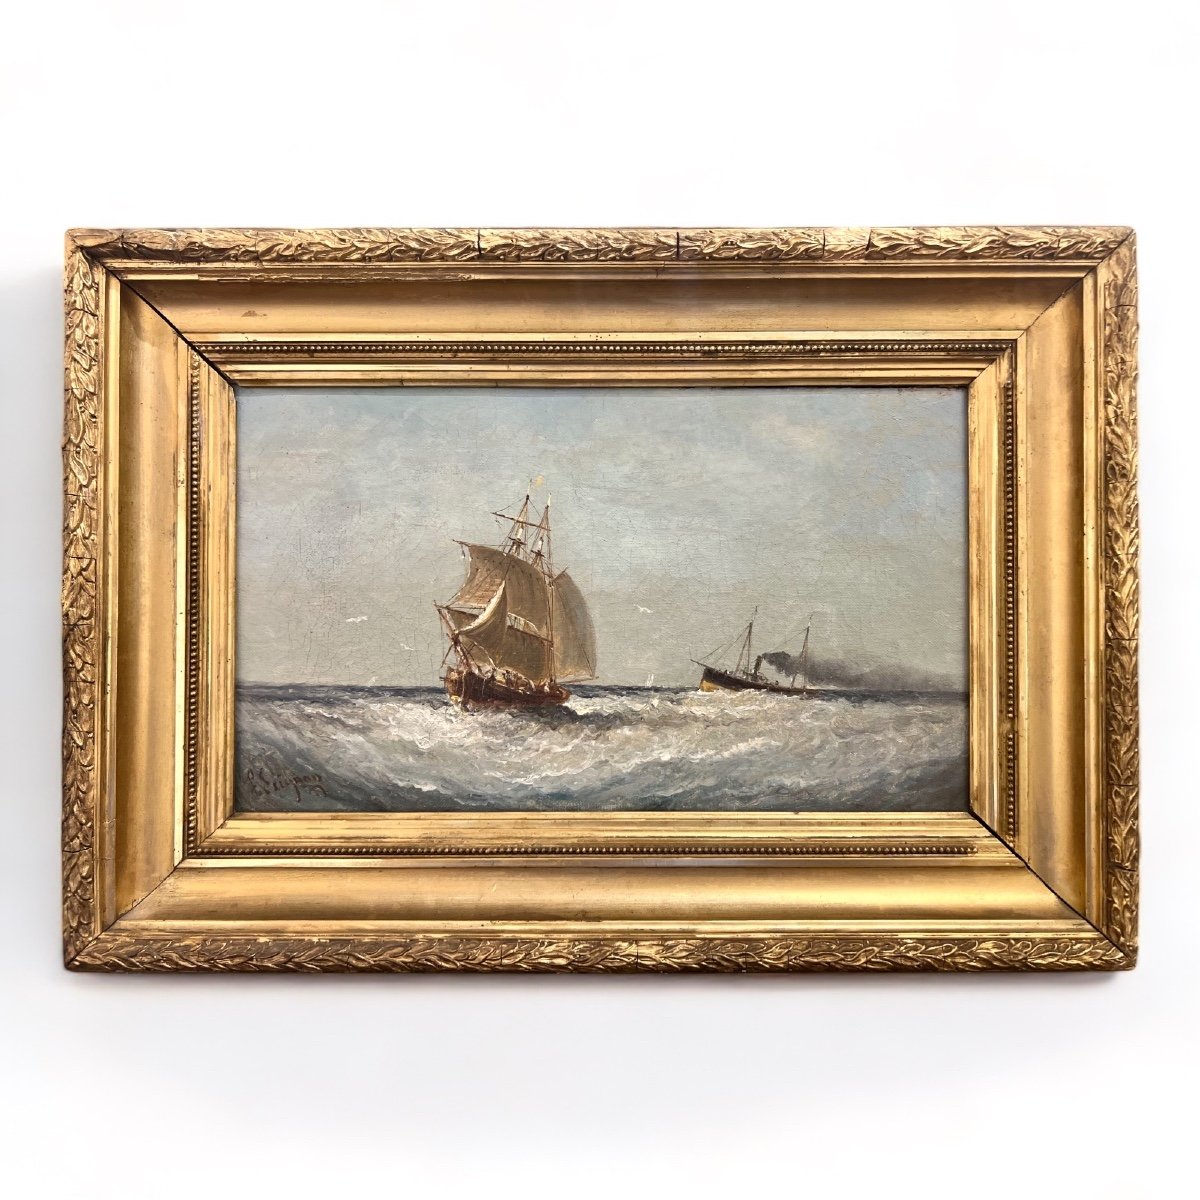 Hst Marine Painting From The 19th Century 